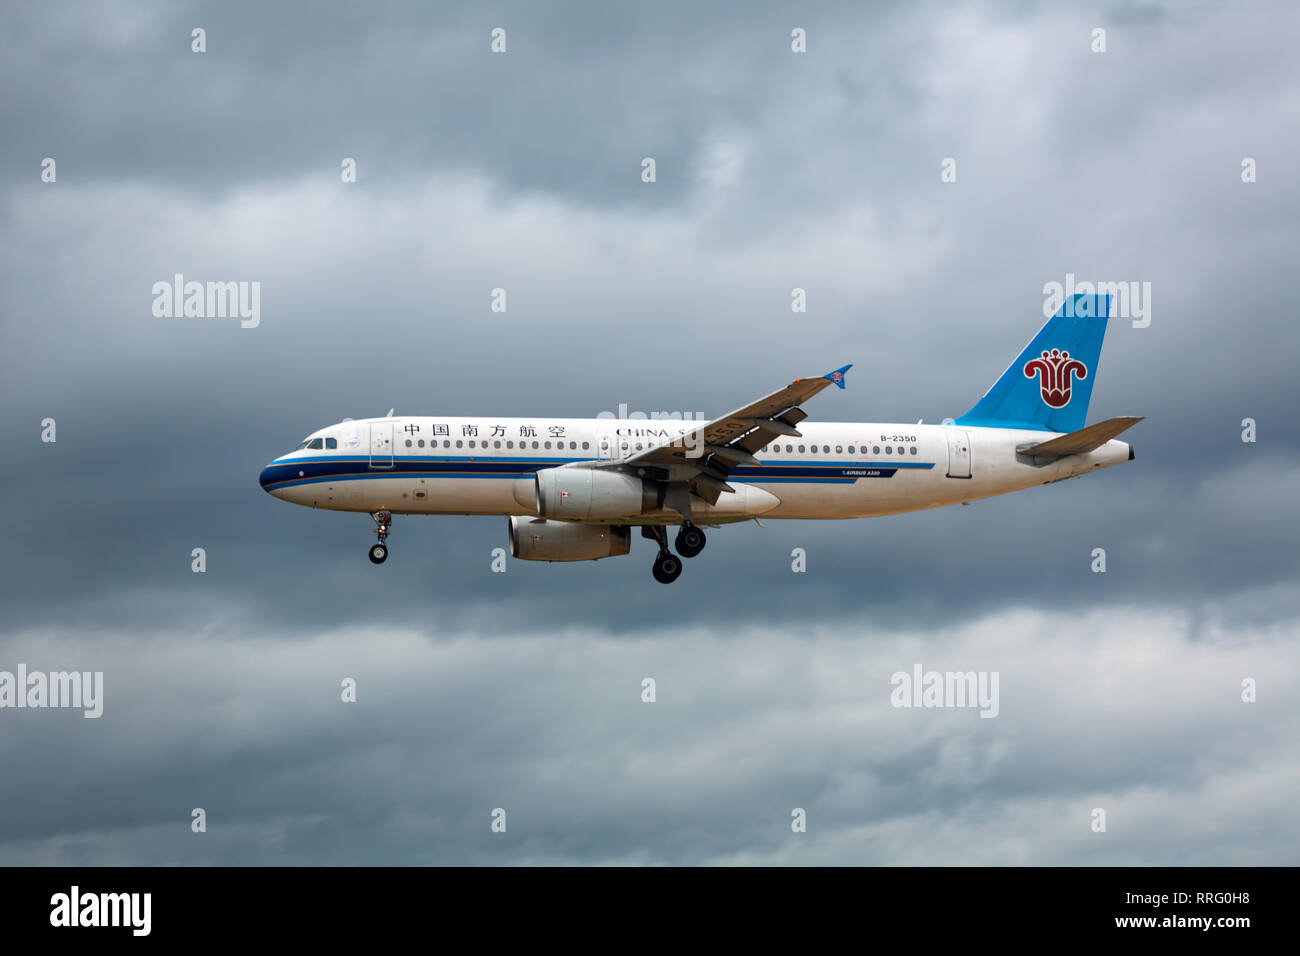 PHUKET, THAILAND - NOVEMBER 27, 2016: Airbus A320-232, B-2350 of China Southern Airlines flies in the sky Stock Photo